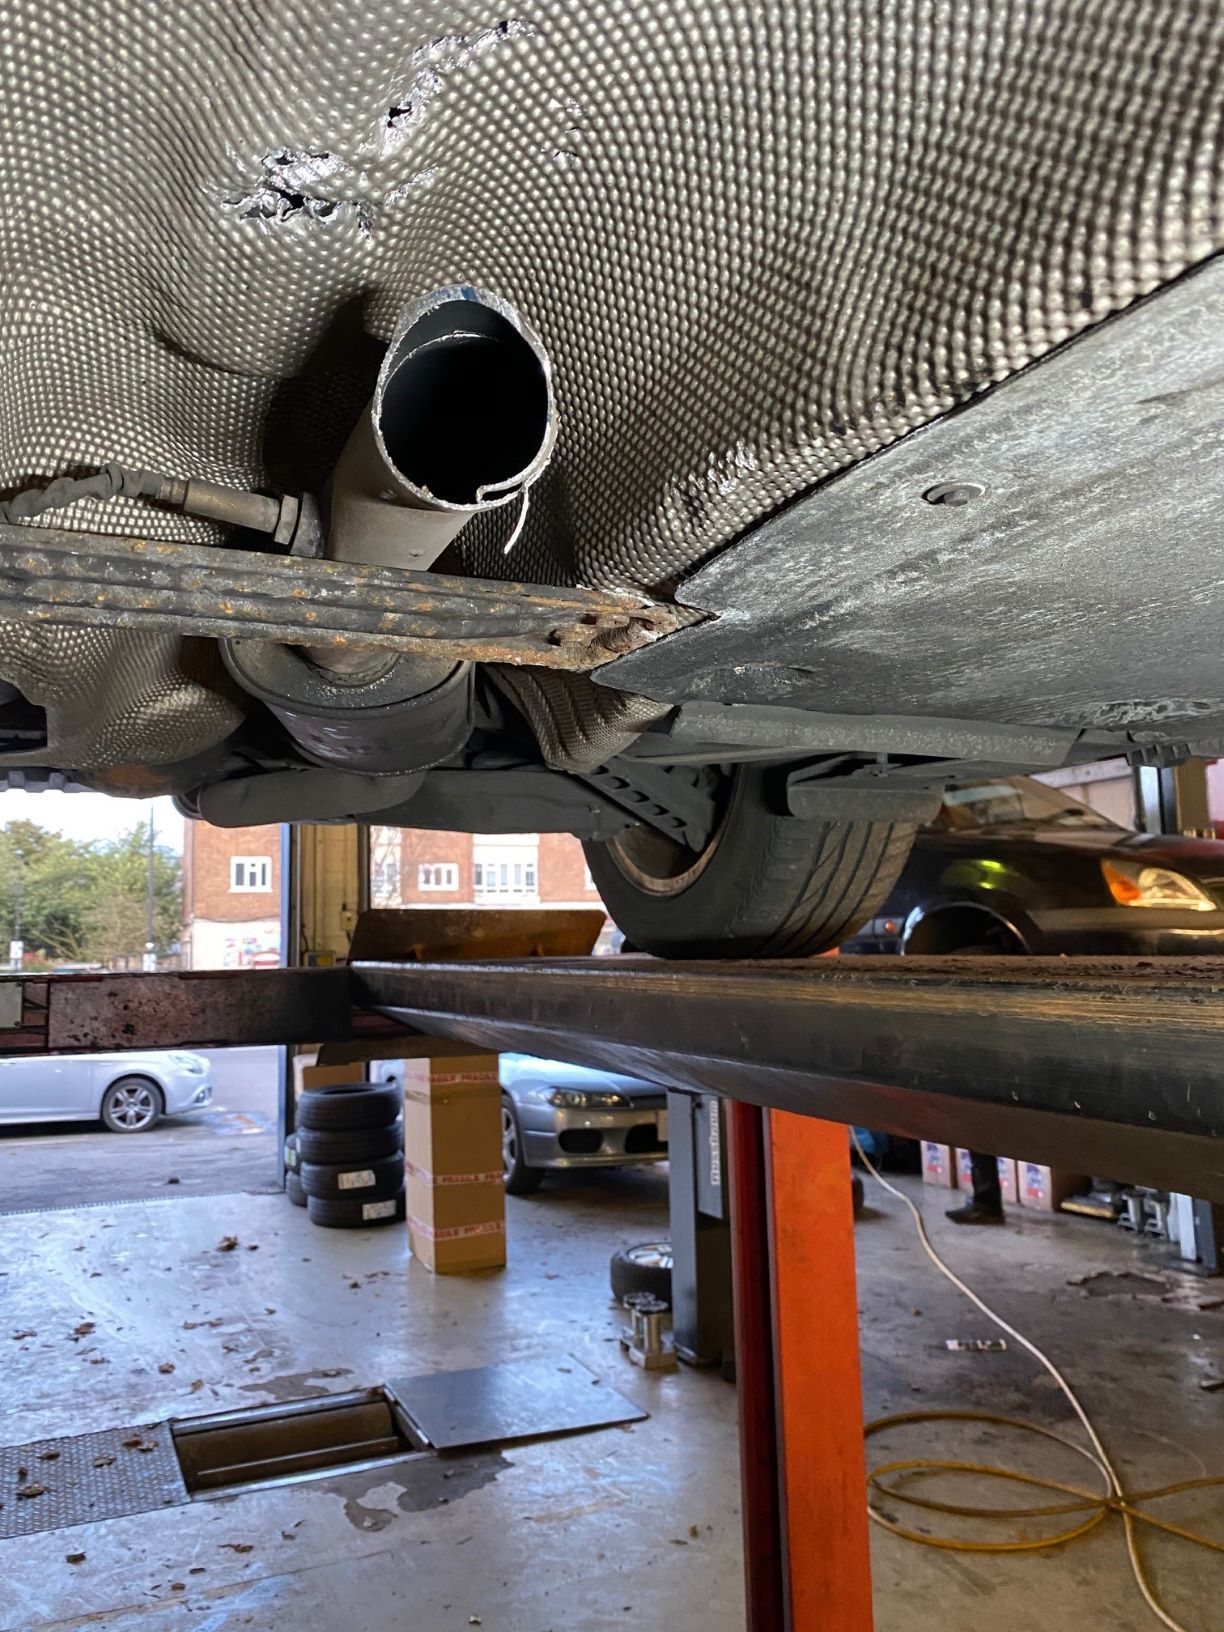 A car on a hoist has had its catalytic converter cut out.